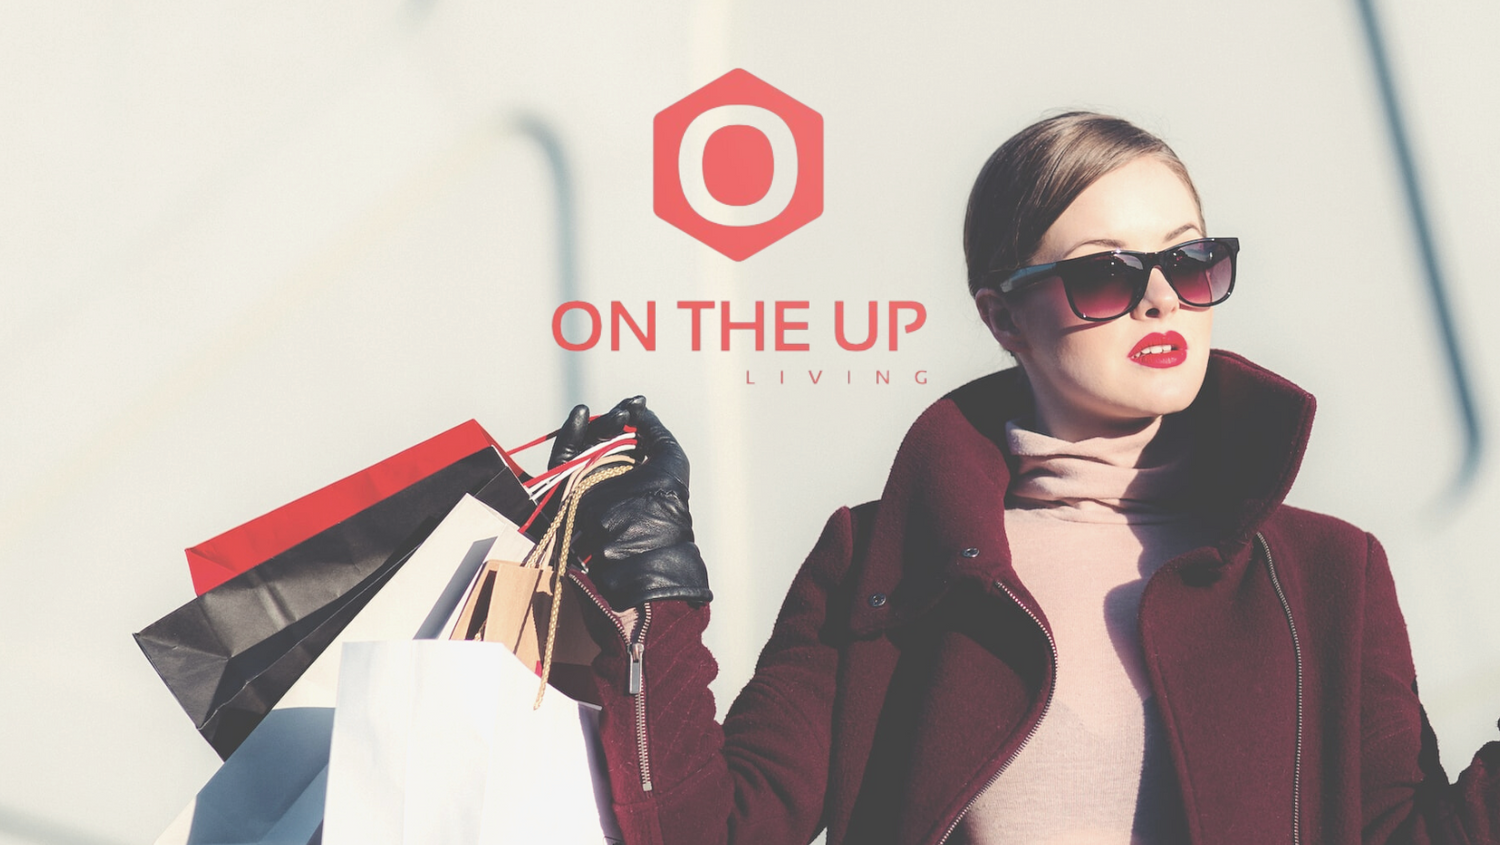 On The Up Living Shop